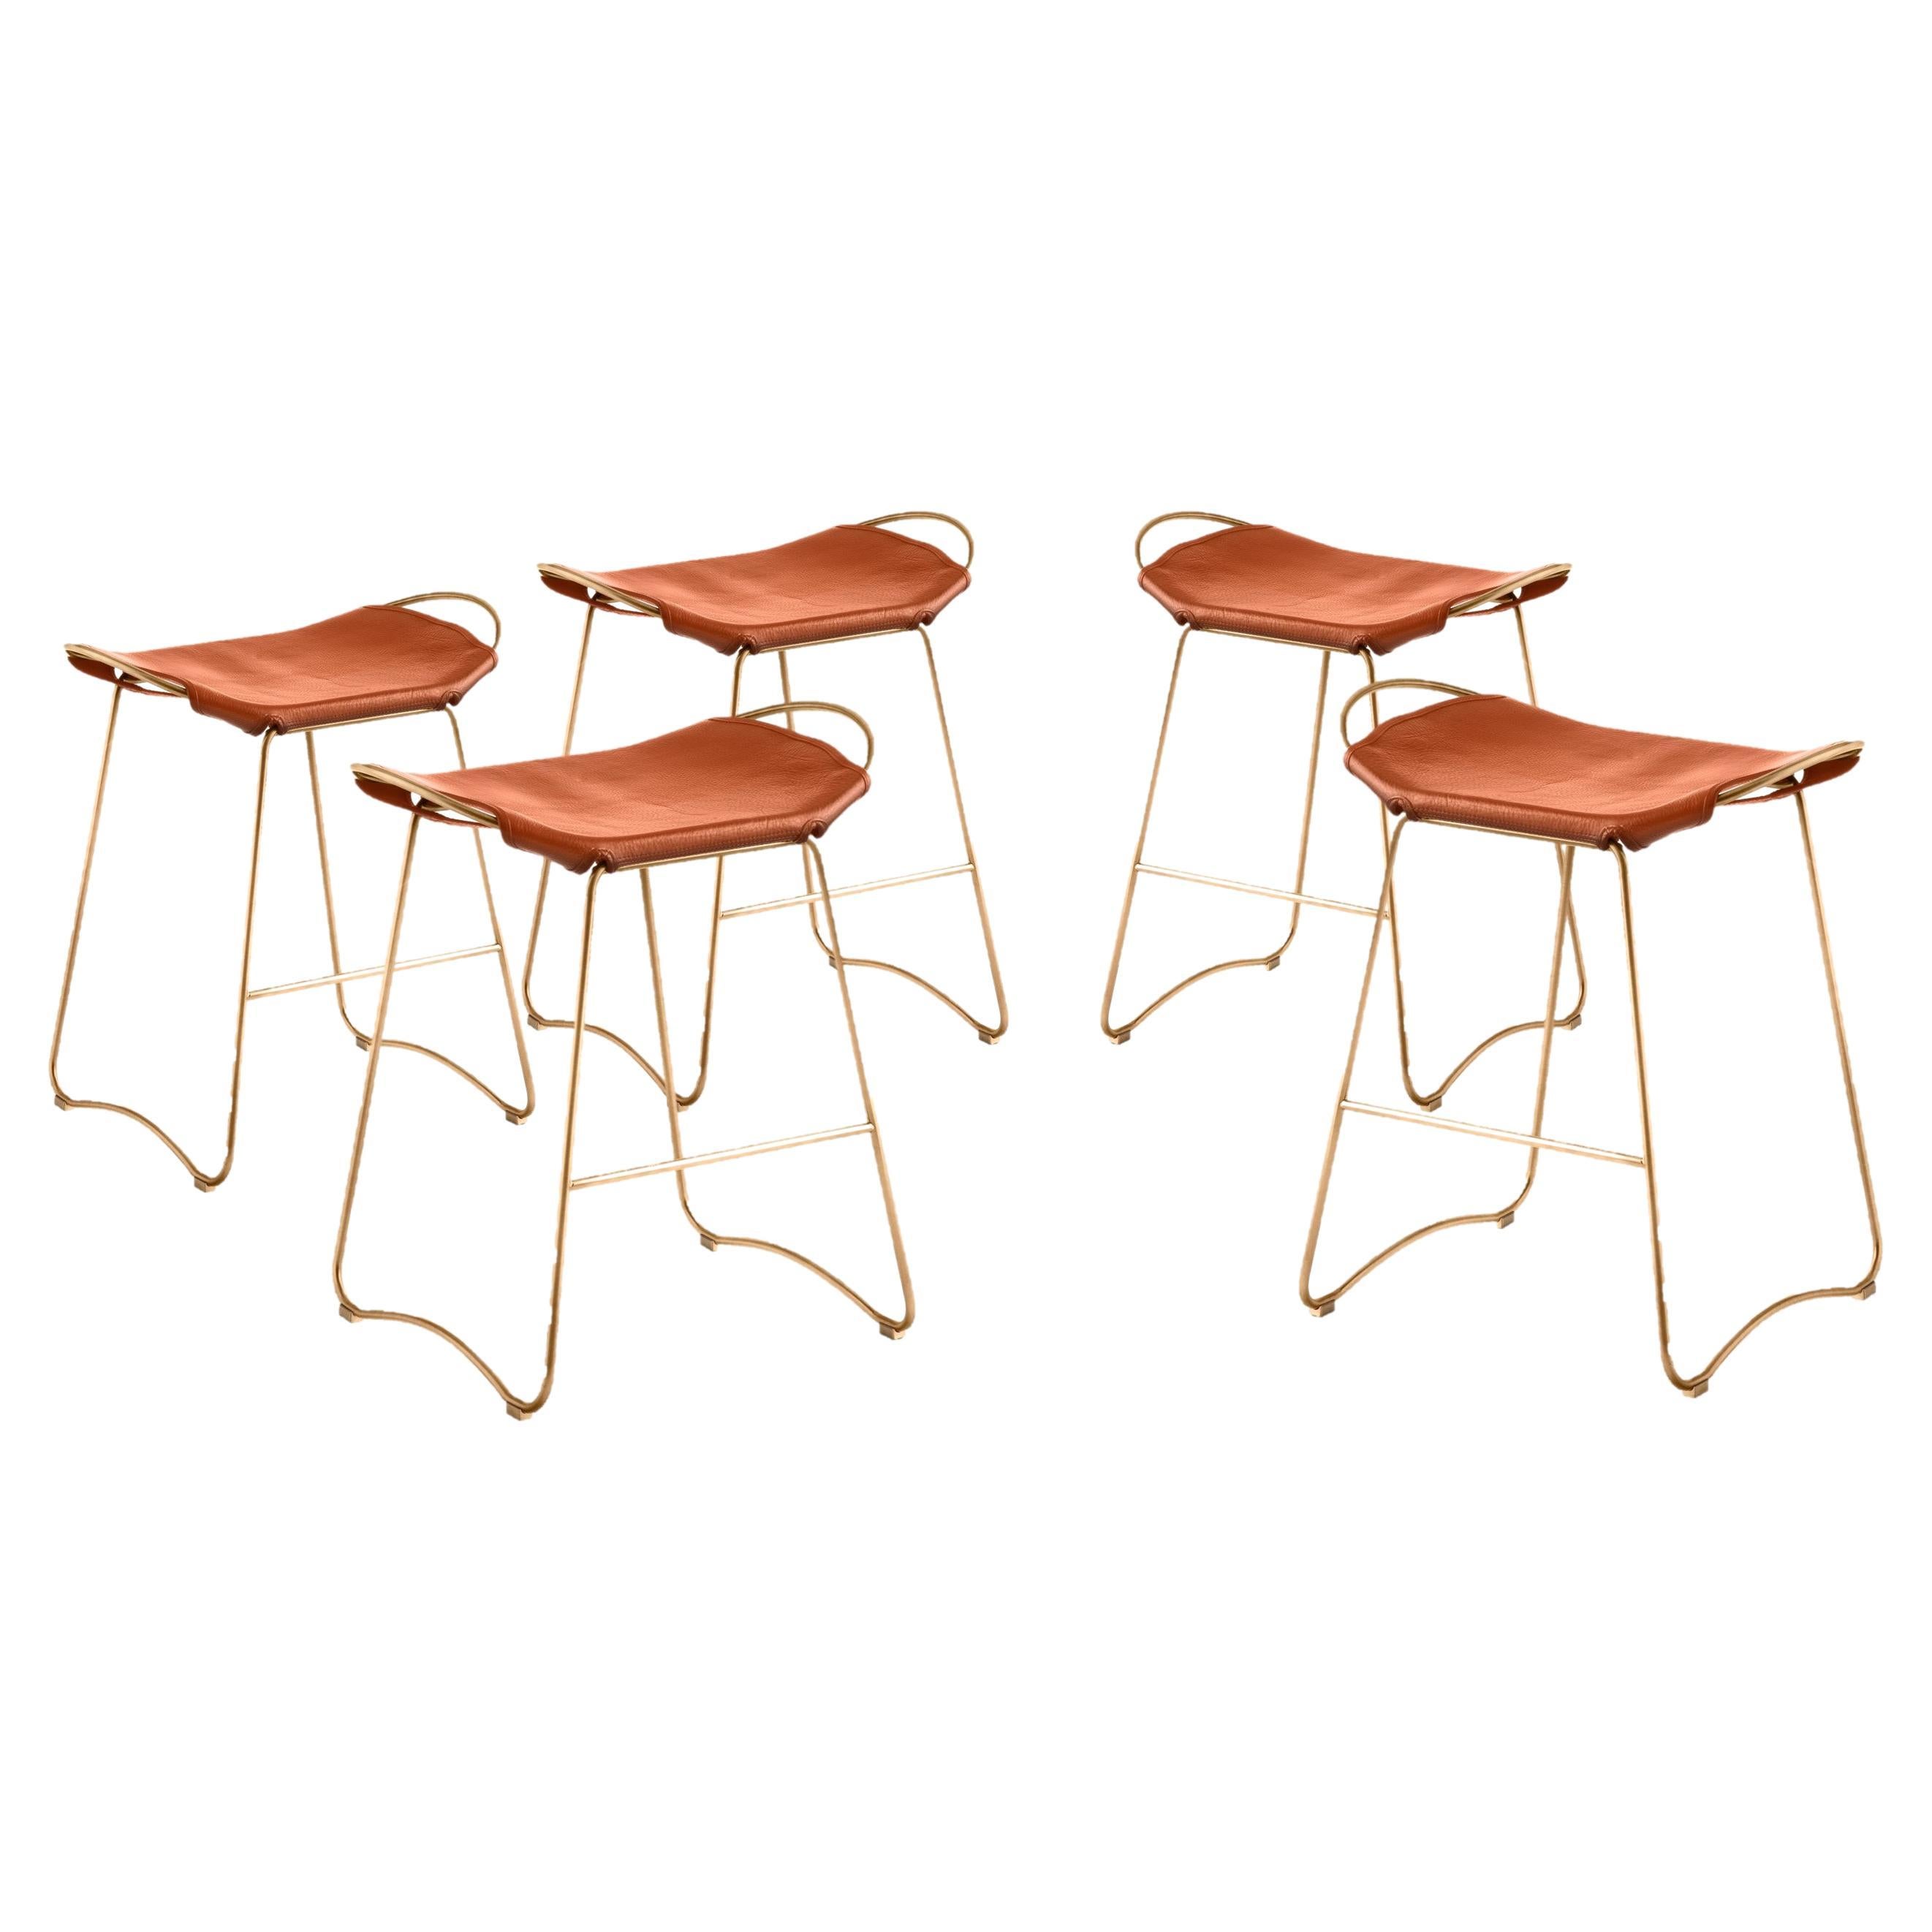 Set of 5 Contemporary Sculptural Bar Stool Brass Metal & Tobacco Leather